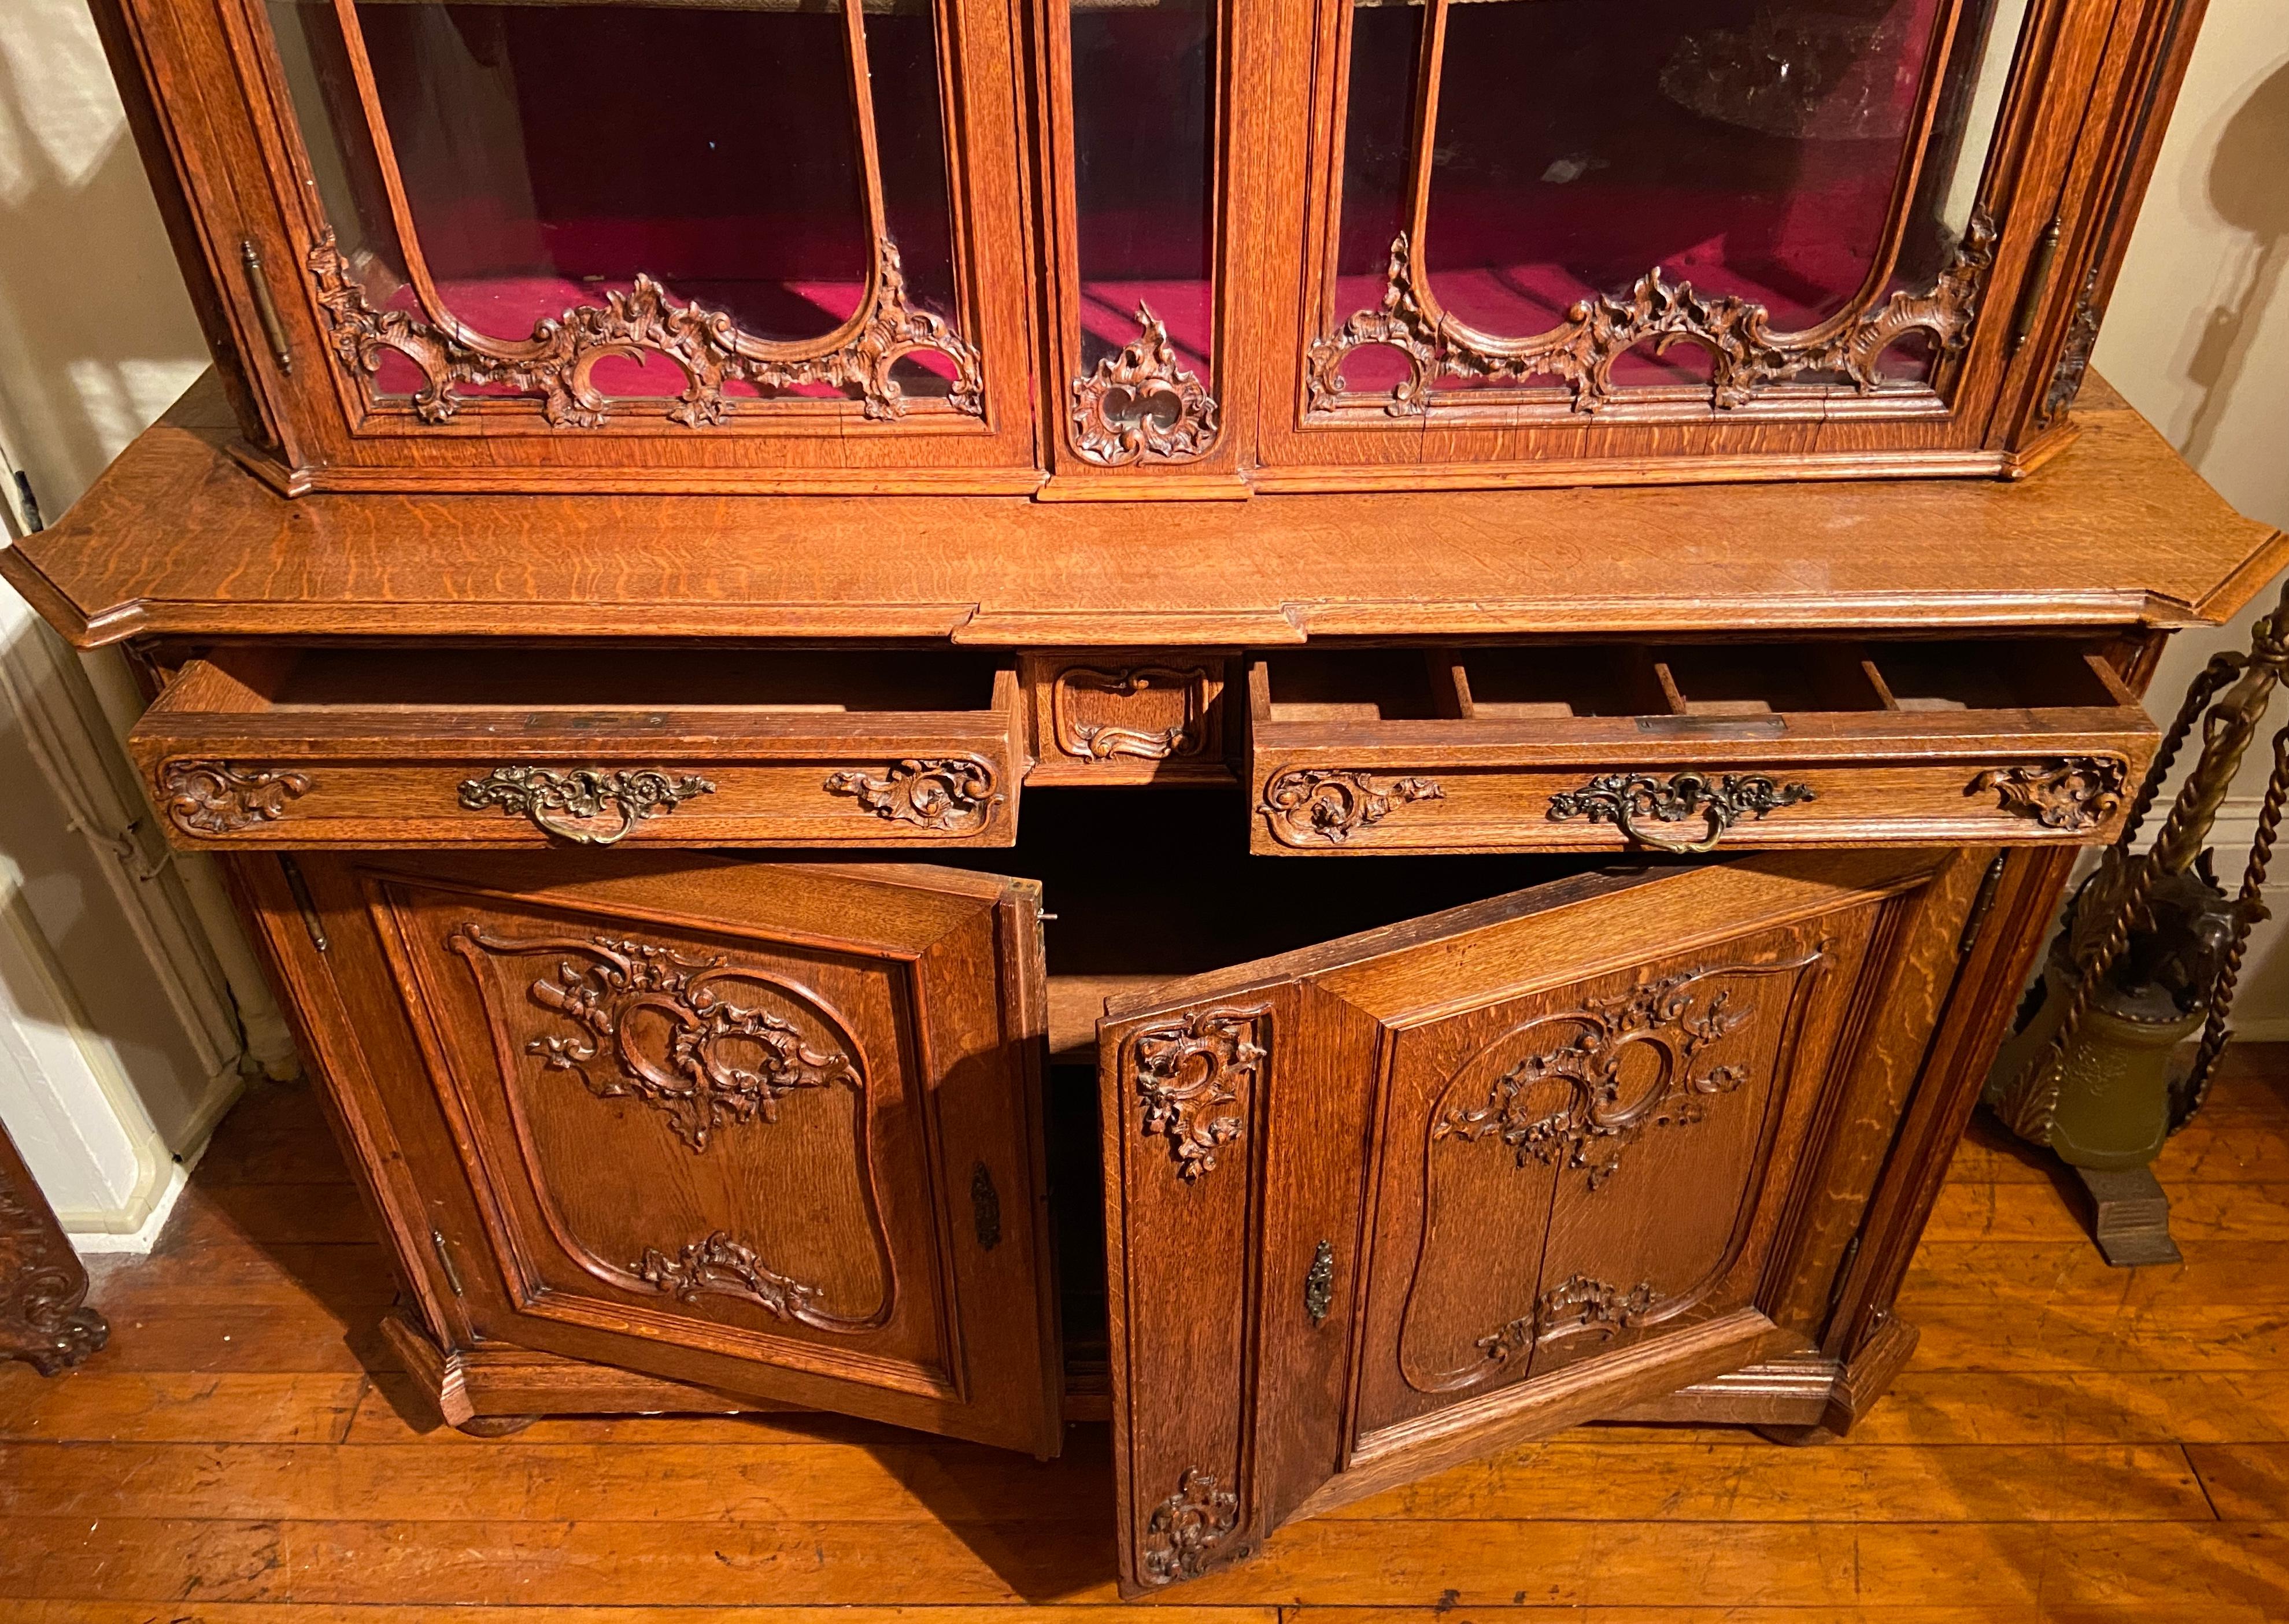 Antique French Liégeoise Carved Cabinet with Glass Front Doors, Circa 1860-1880 For Sale 2